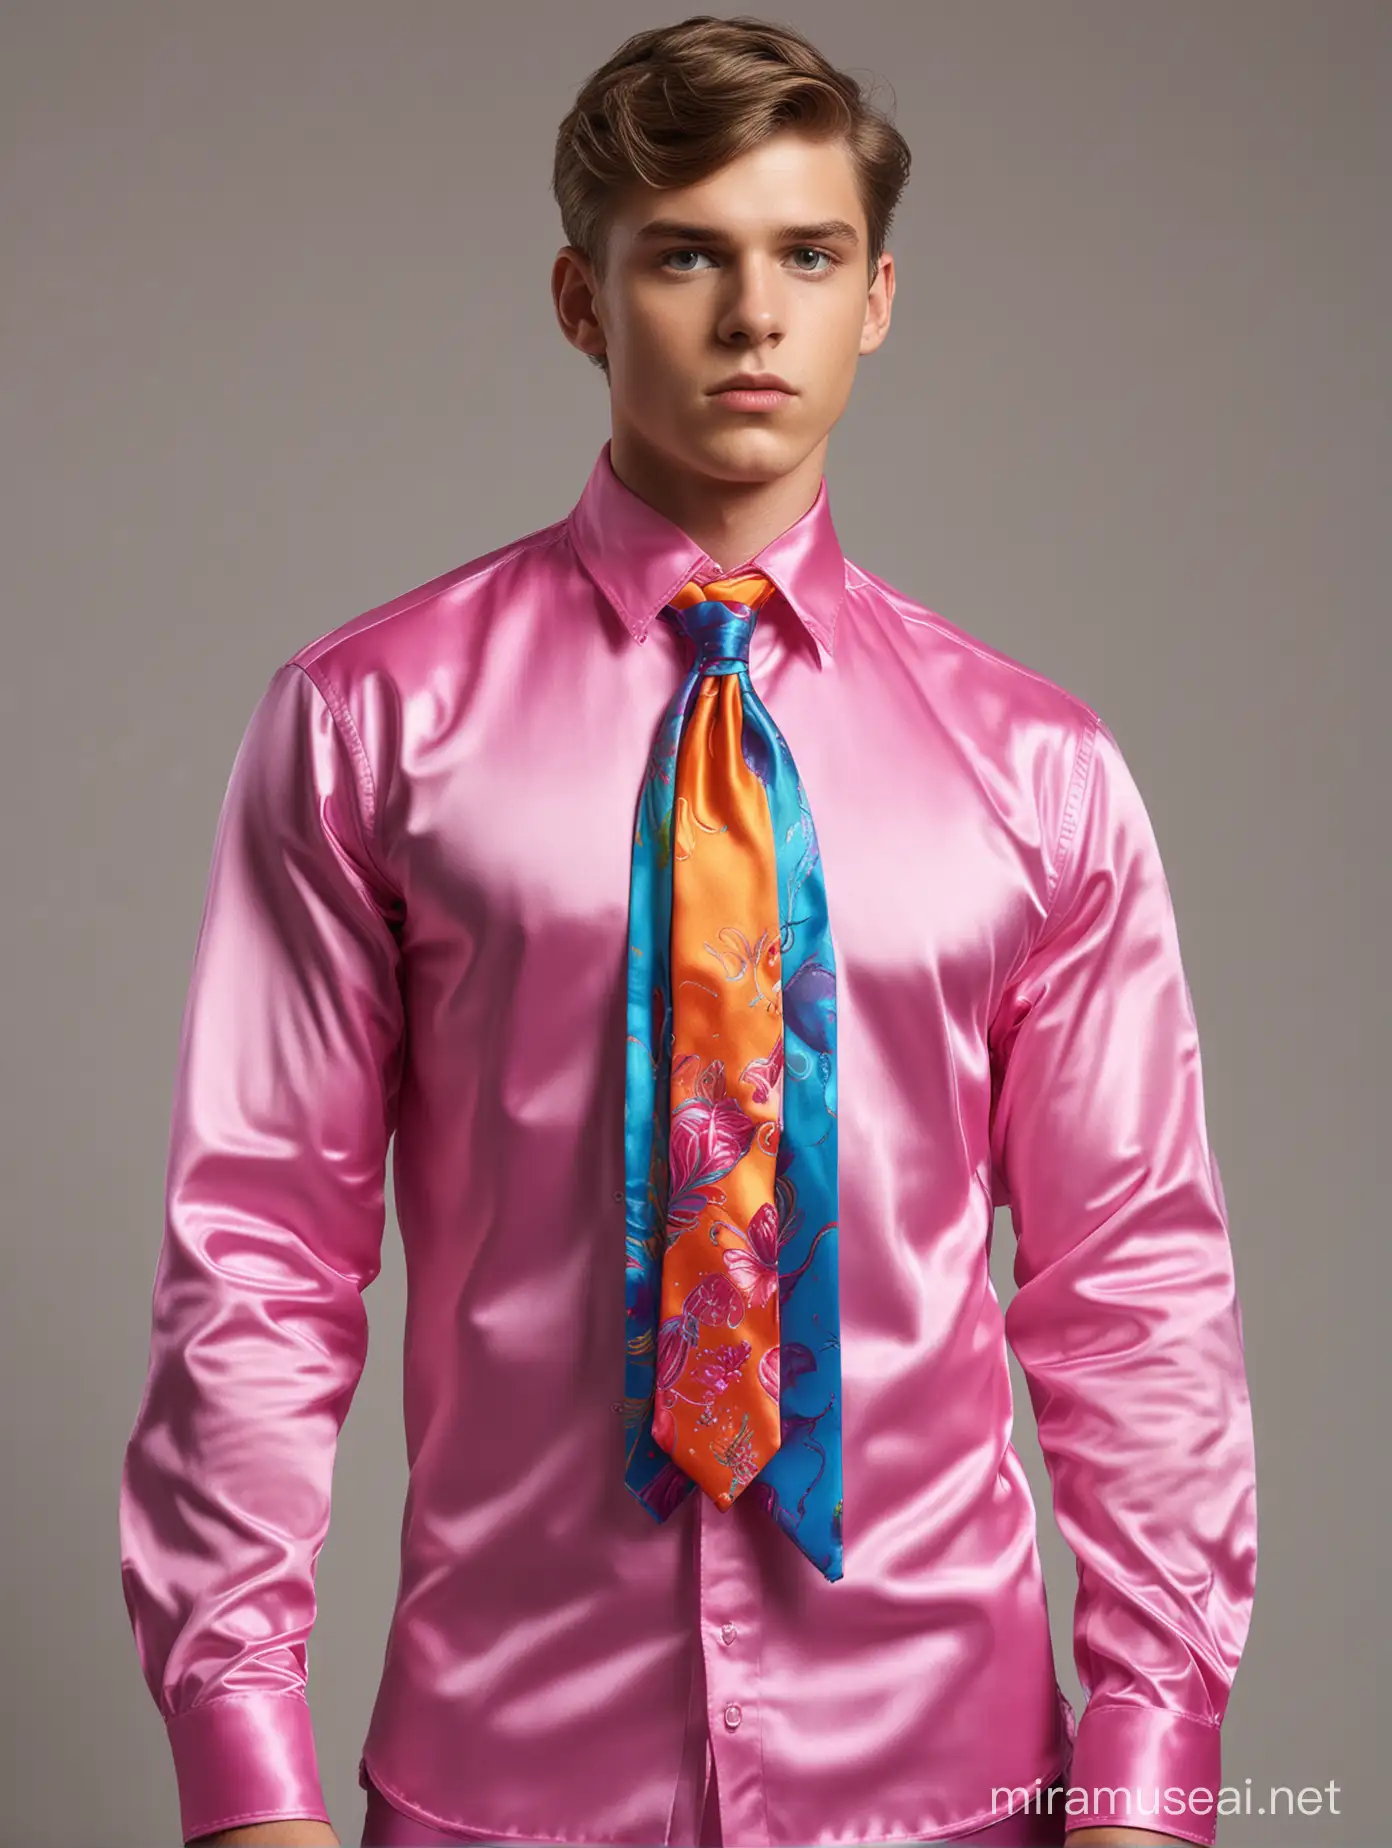 A hyper-realistic full-body portrait photo of 2 twinks in satin speedo wearing a bright colourful shiny satin shirt (((embellishment of large high collar shirt and hyper large tie))) handsome faces, massive bulging chest muscles, detail and size concentration on oversized satin tie